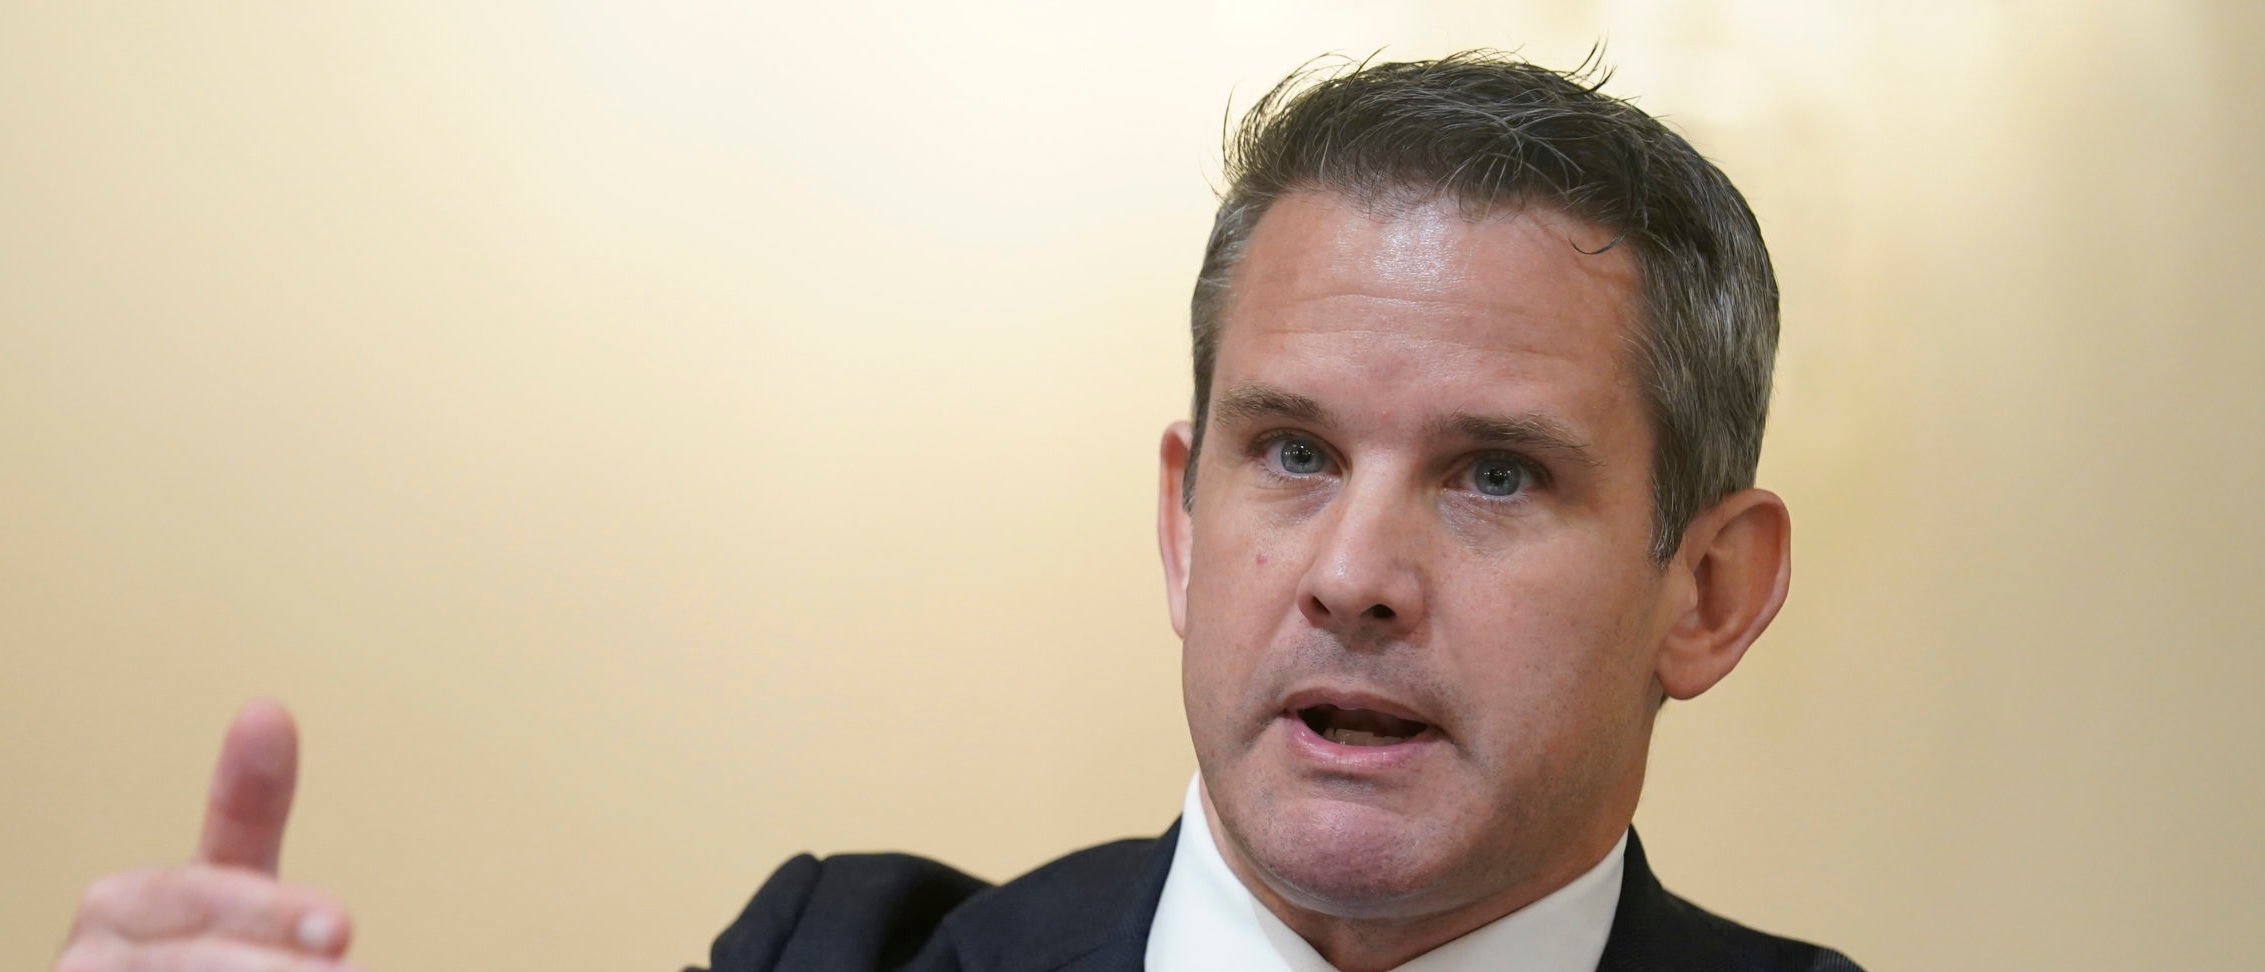 Rep. Kinzinger Says Secret Service Agent Prepared To Testify Against Hutchinson ‘Likes To Lie’